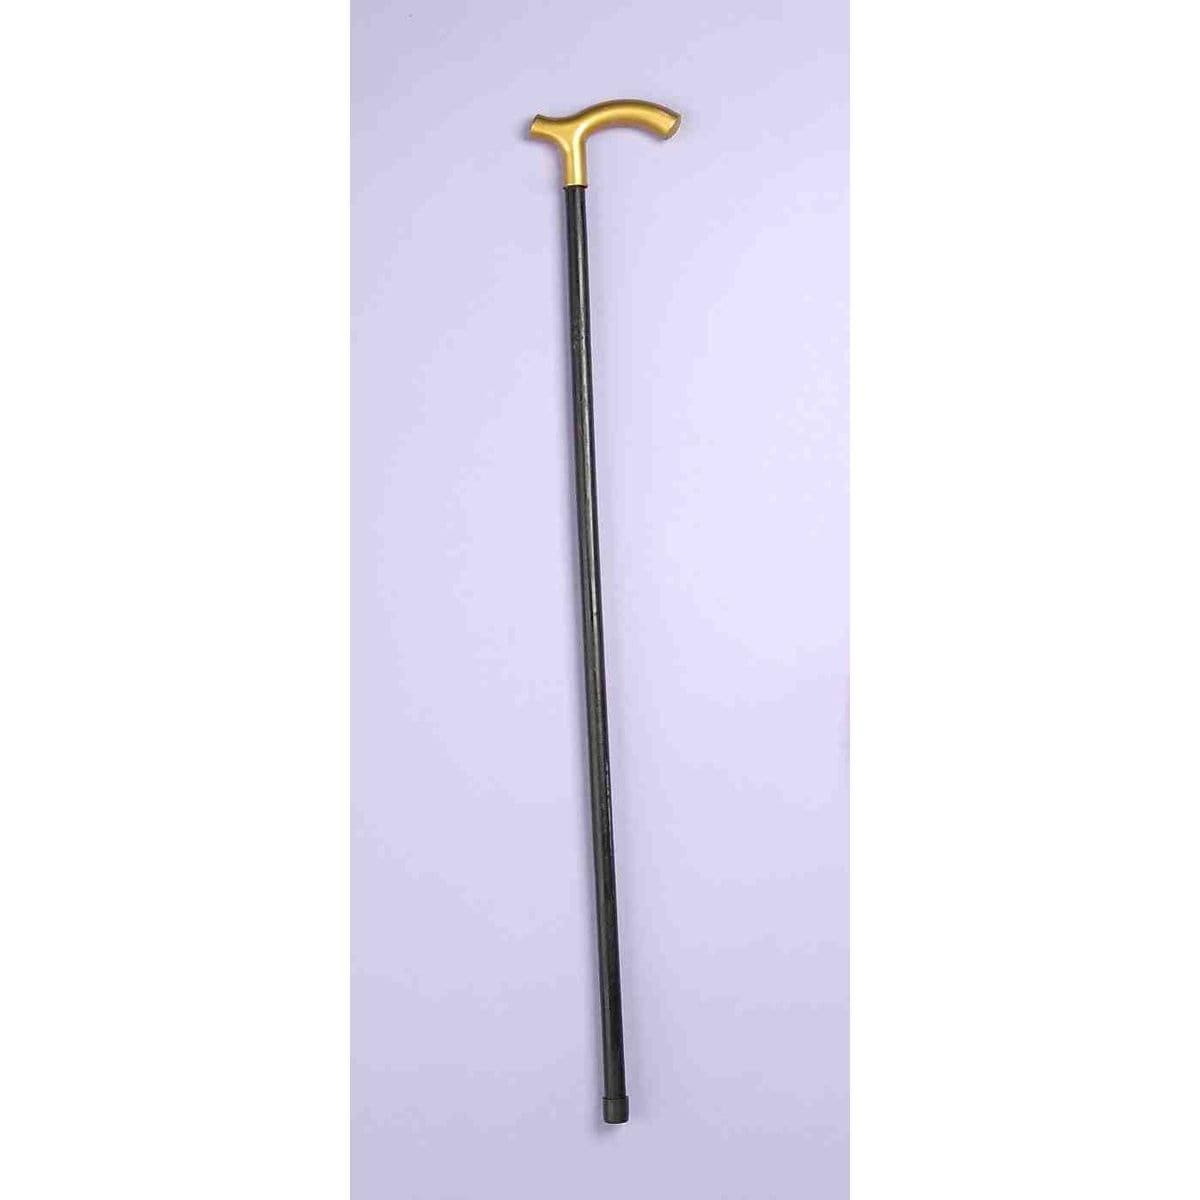 Buy Costume Accessories Walking cane sold at Party Expert